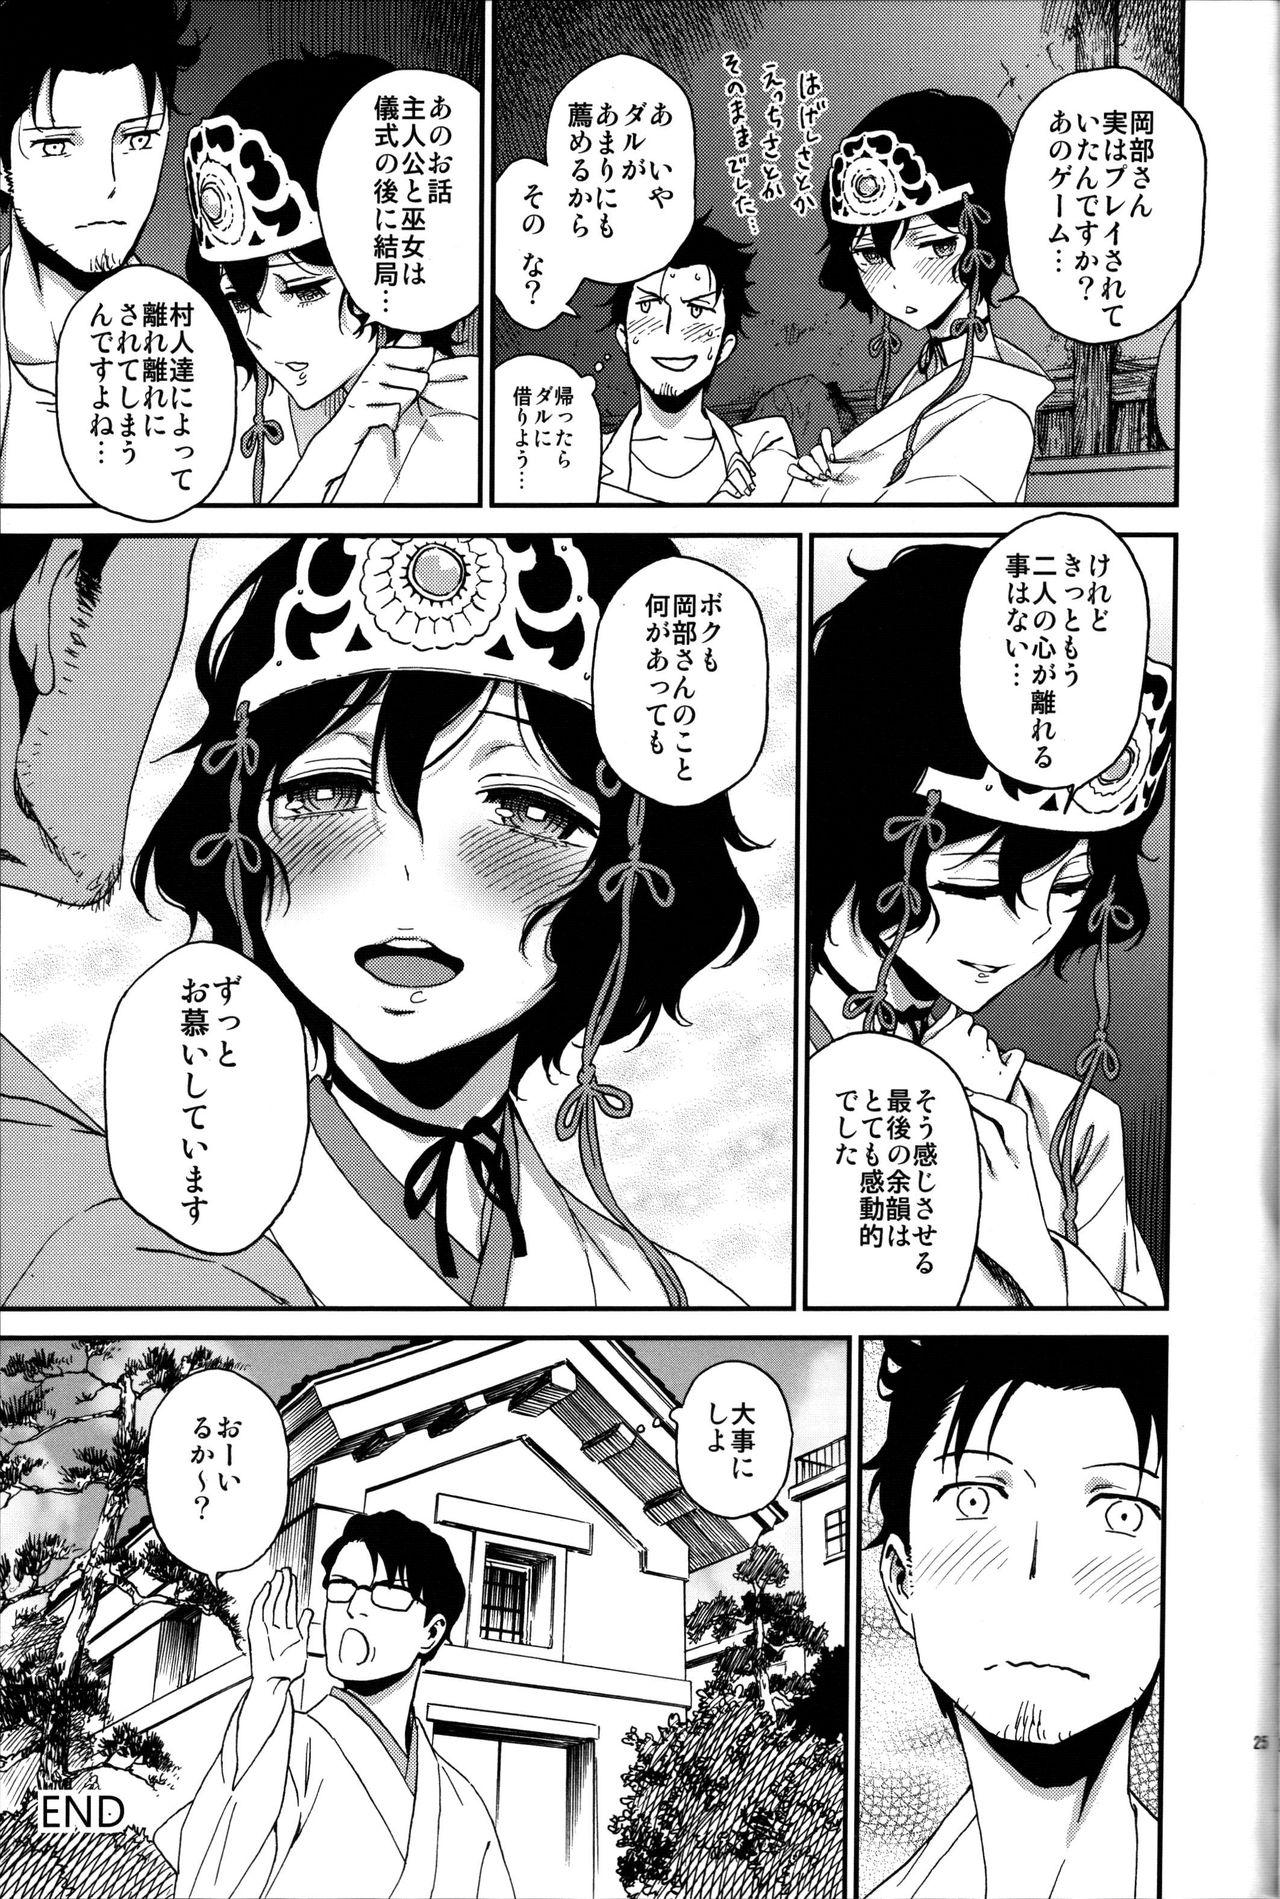 And Yaotome no Chrysanthemum - Steinsgate Solo - Page 24